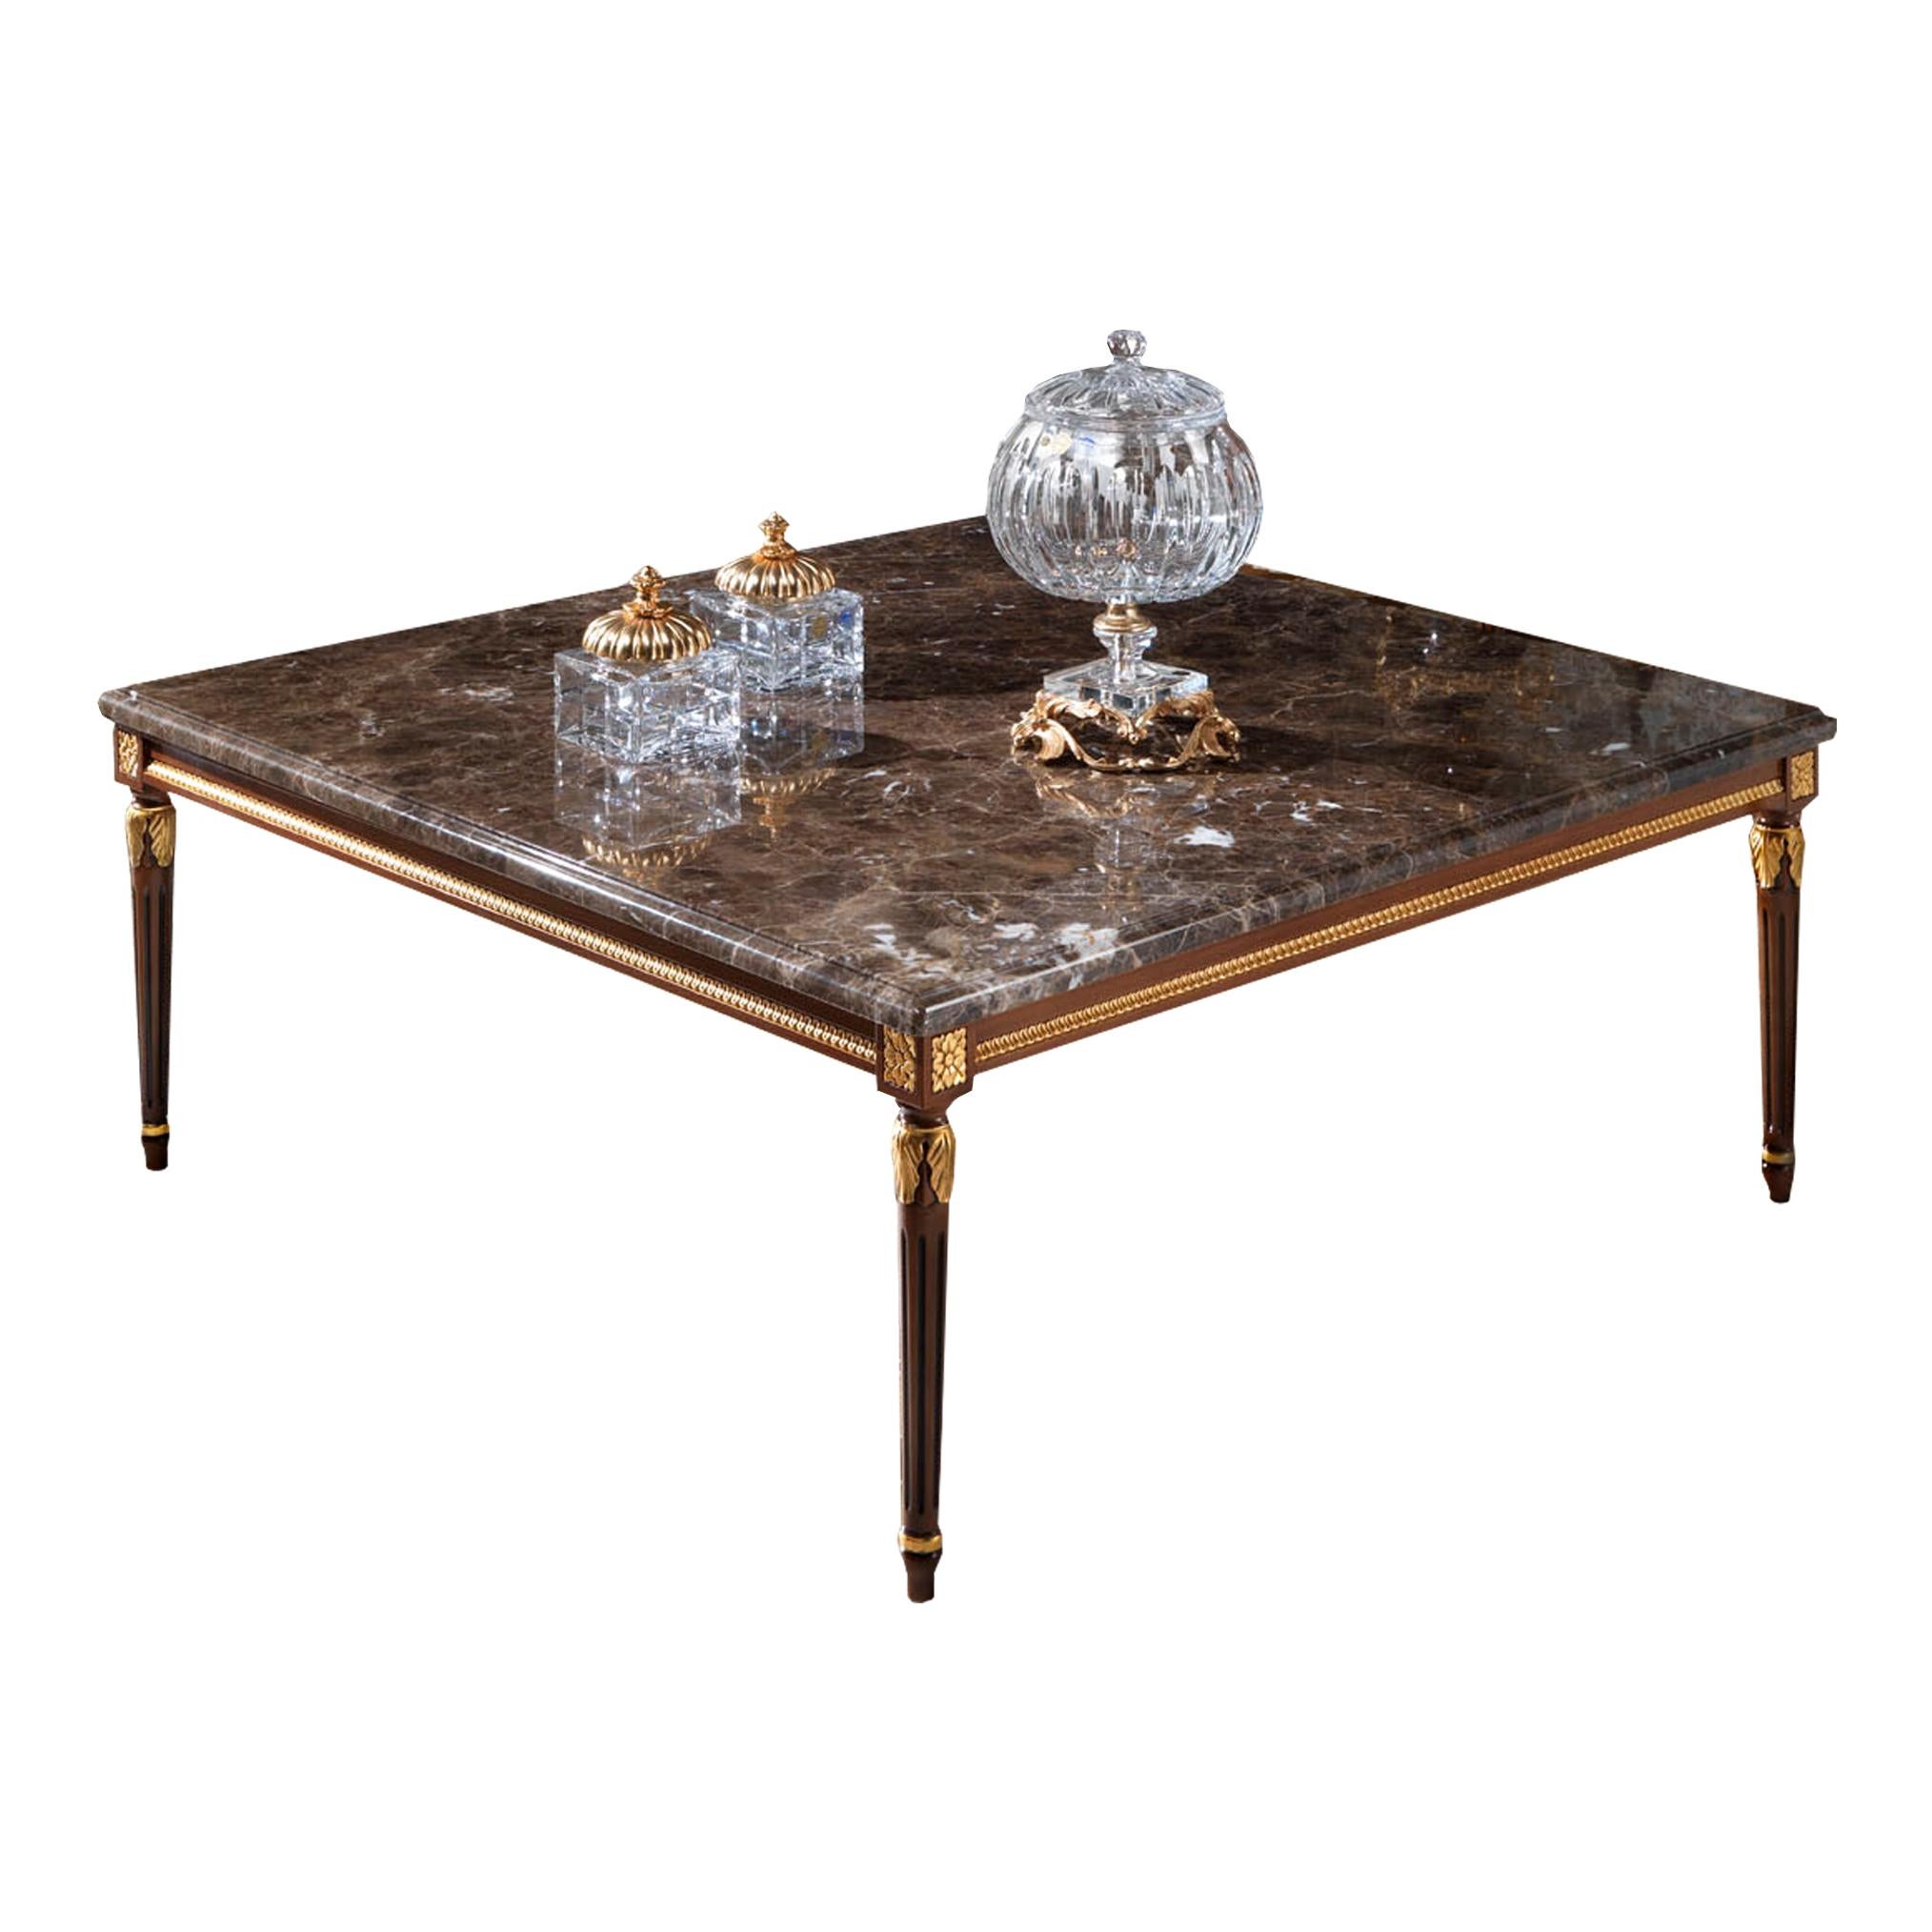 Enjoy the real Made in Italy luxury life style with this hand-decorated square coffee table. Emperador Dark marble top, solid empire-style wooden structure hand decorated in walnut finish and gold leaf details. And ask yourself: what else would I